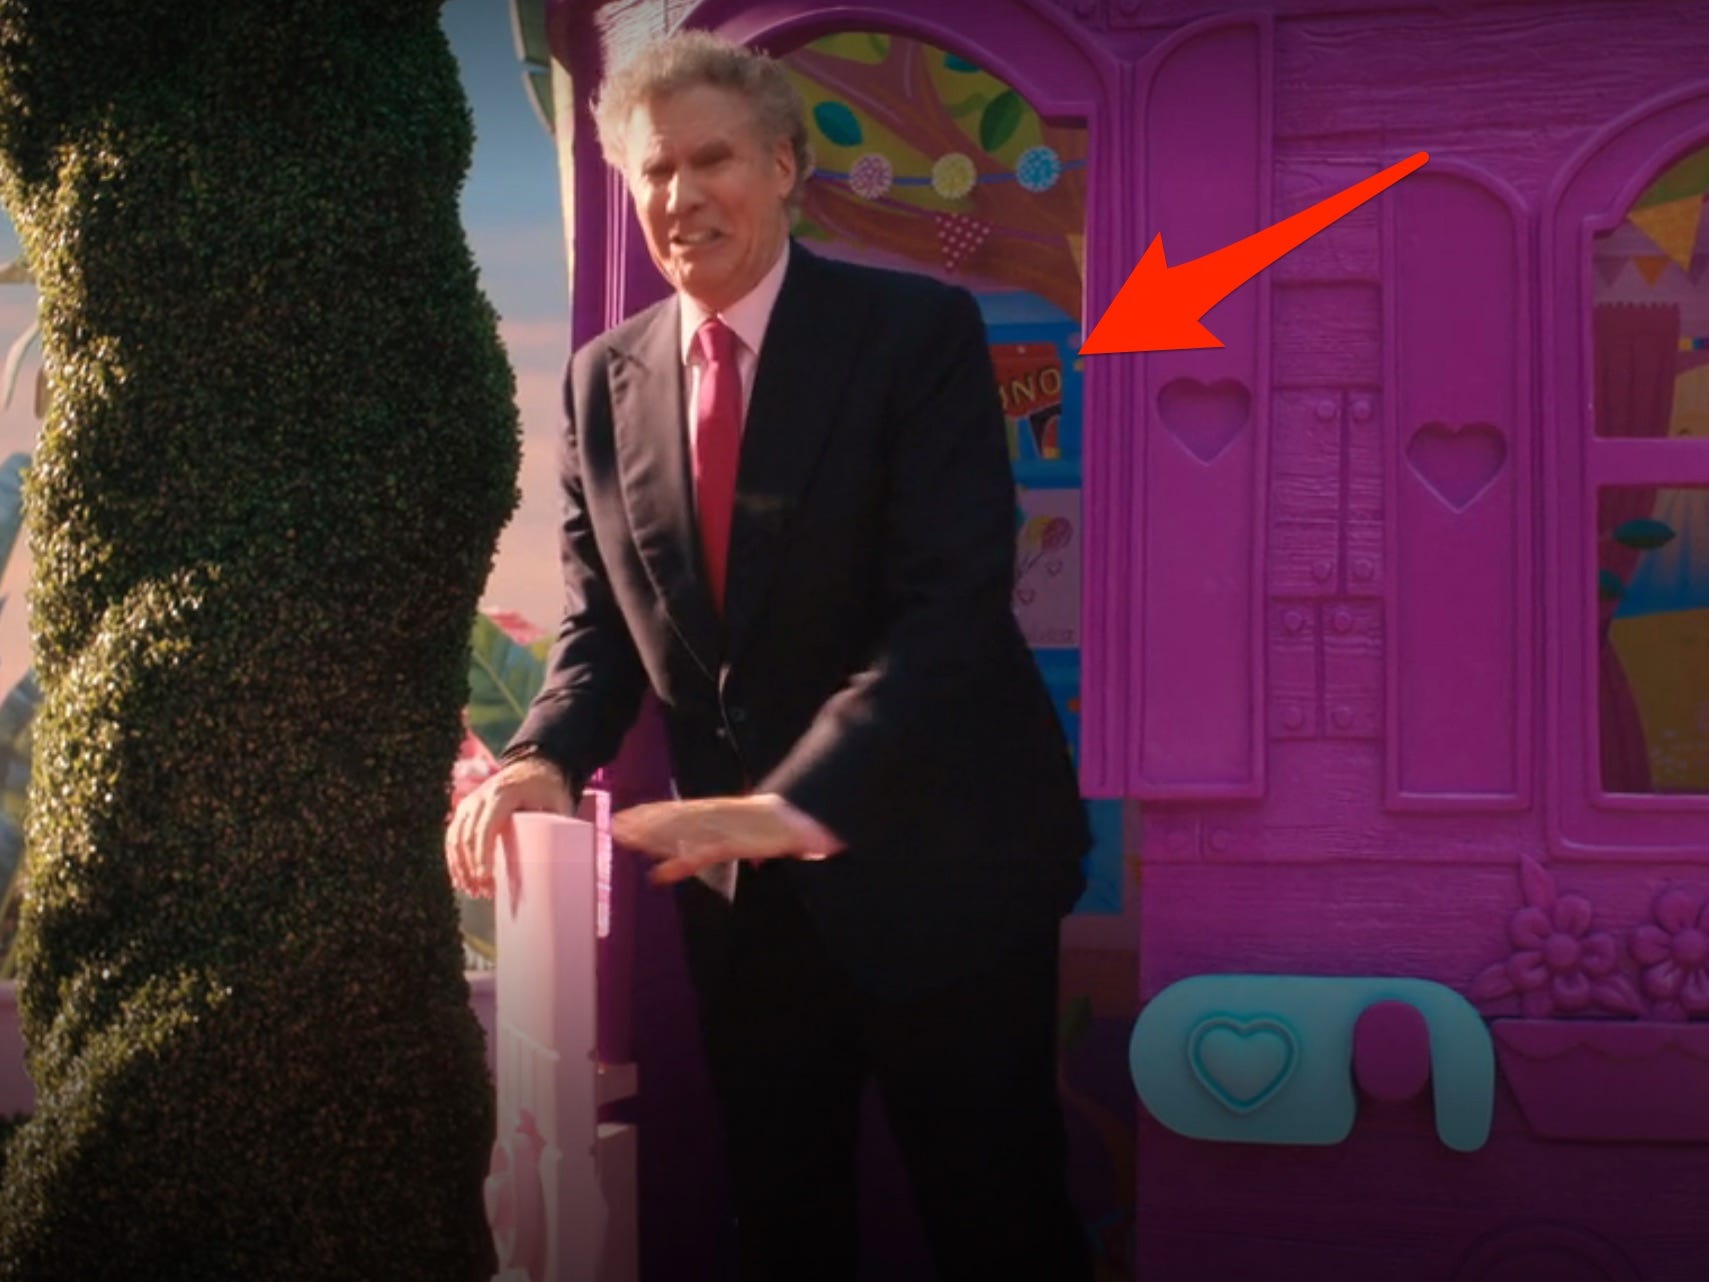 will ferrel walks out of a purple treehouse in barbie. theres a red arrow pointing to an uno deck on the wall behind him